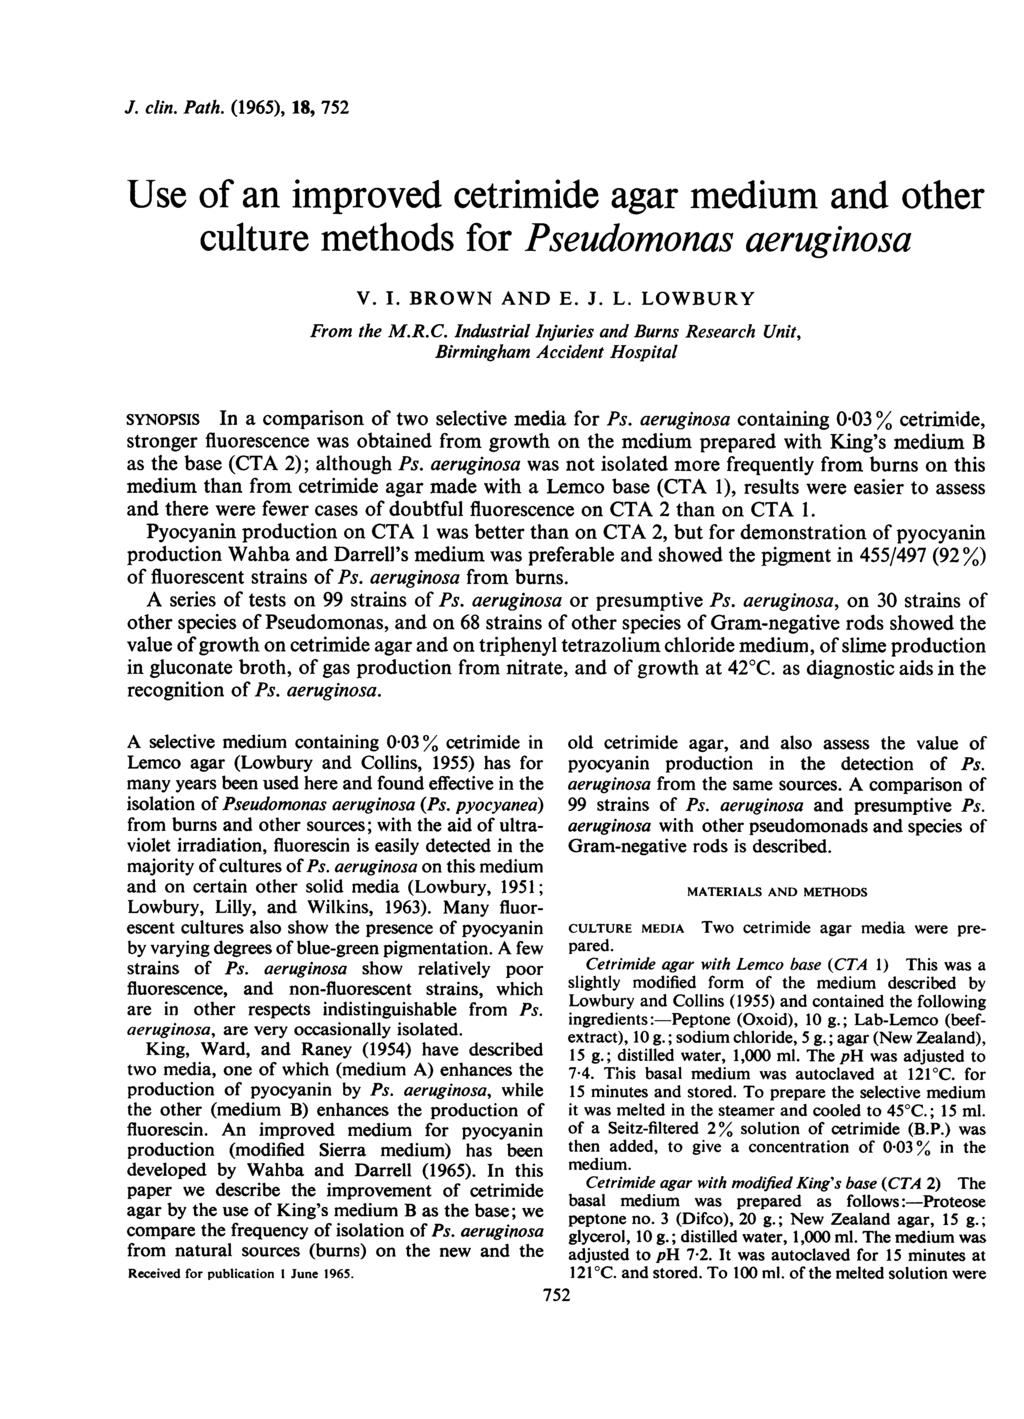 J. clin. Path. (1965), 18, 752 Use of an improved cetrimide agar medium and other culture methods for Pseudomonas aeruginosa V. I. BROWN AND E. J. L. LOWBURY From the M.R.C.